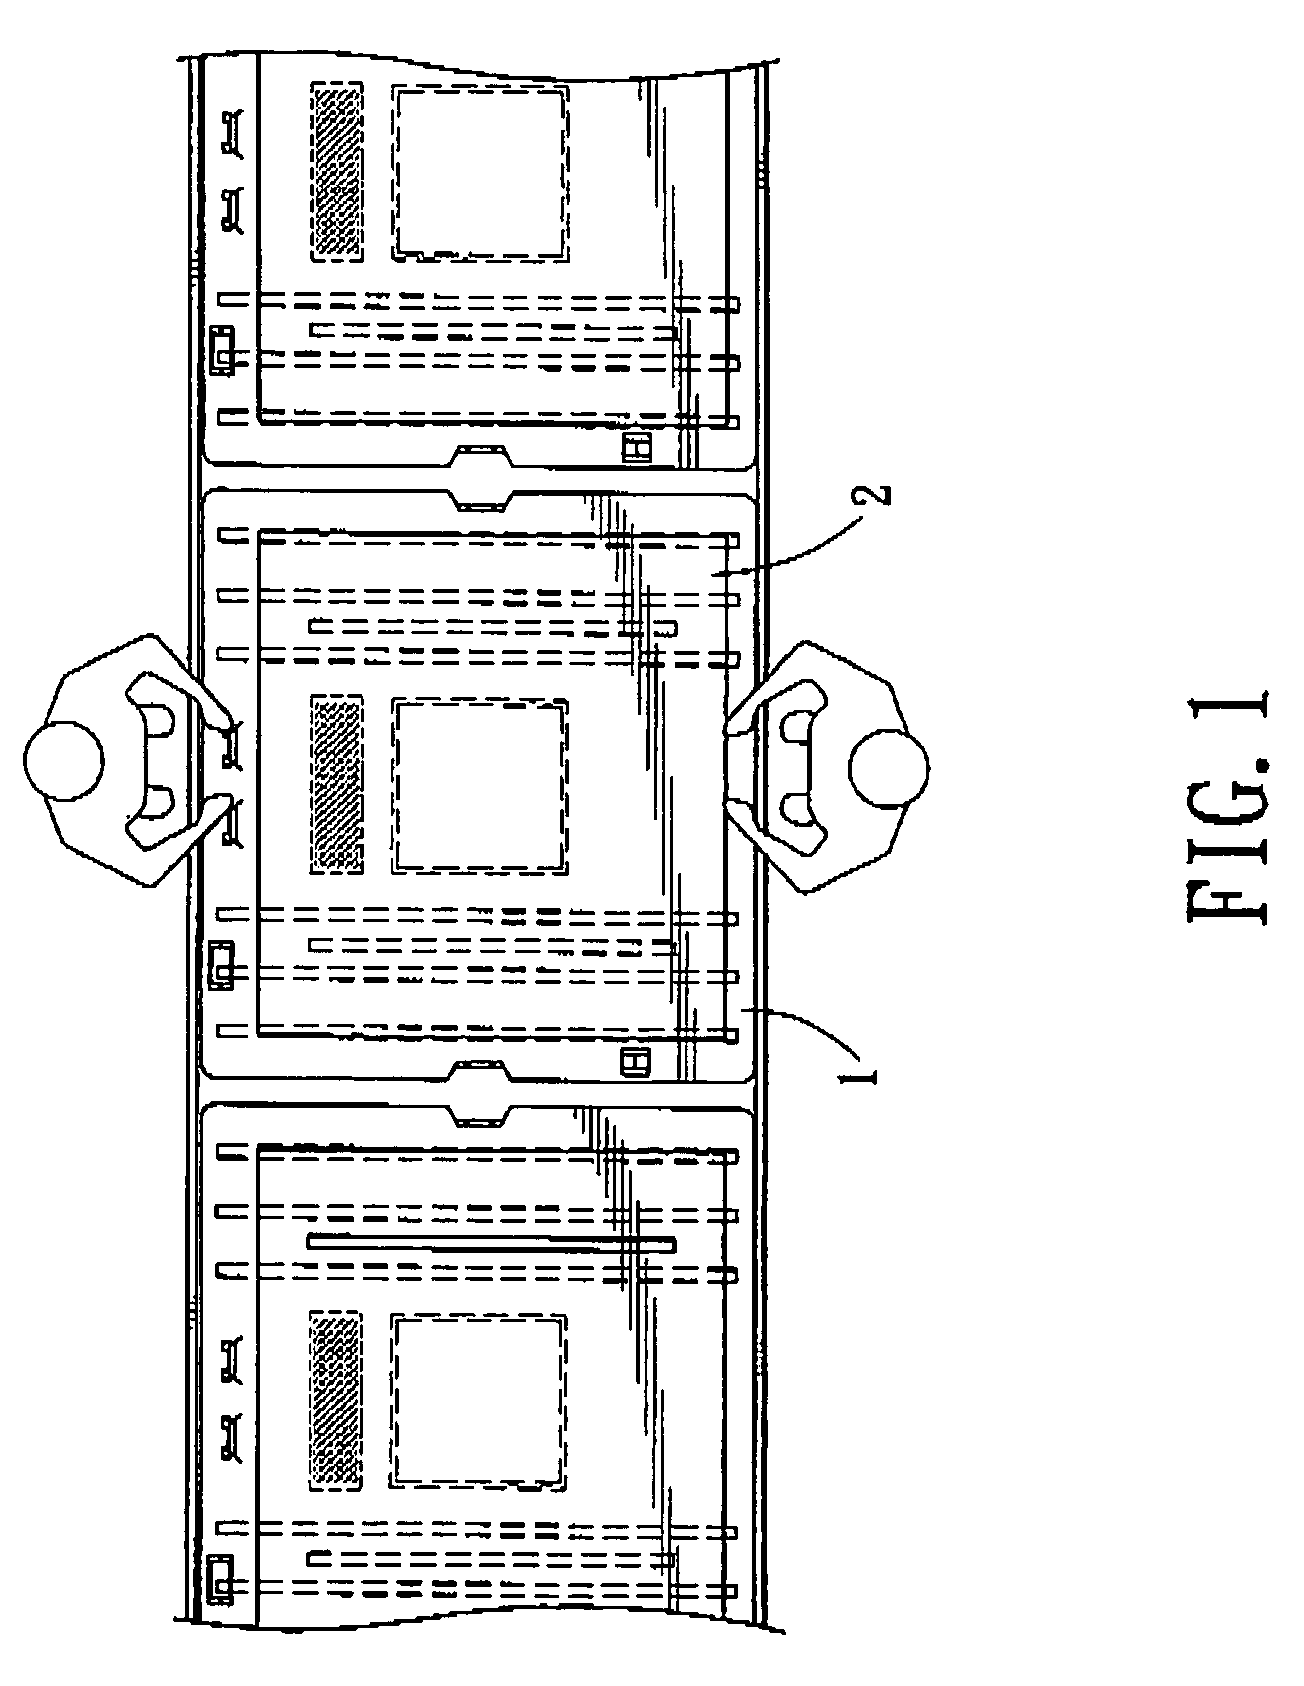 System for testing flat panel display devices